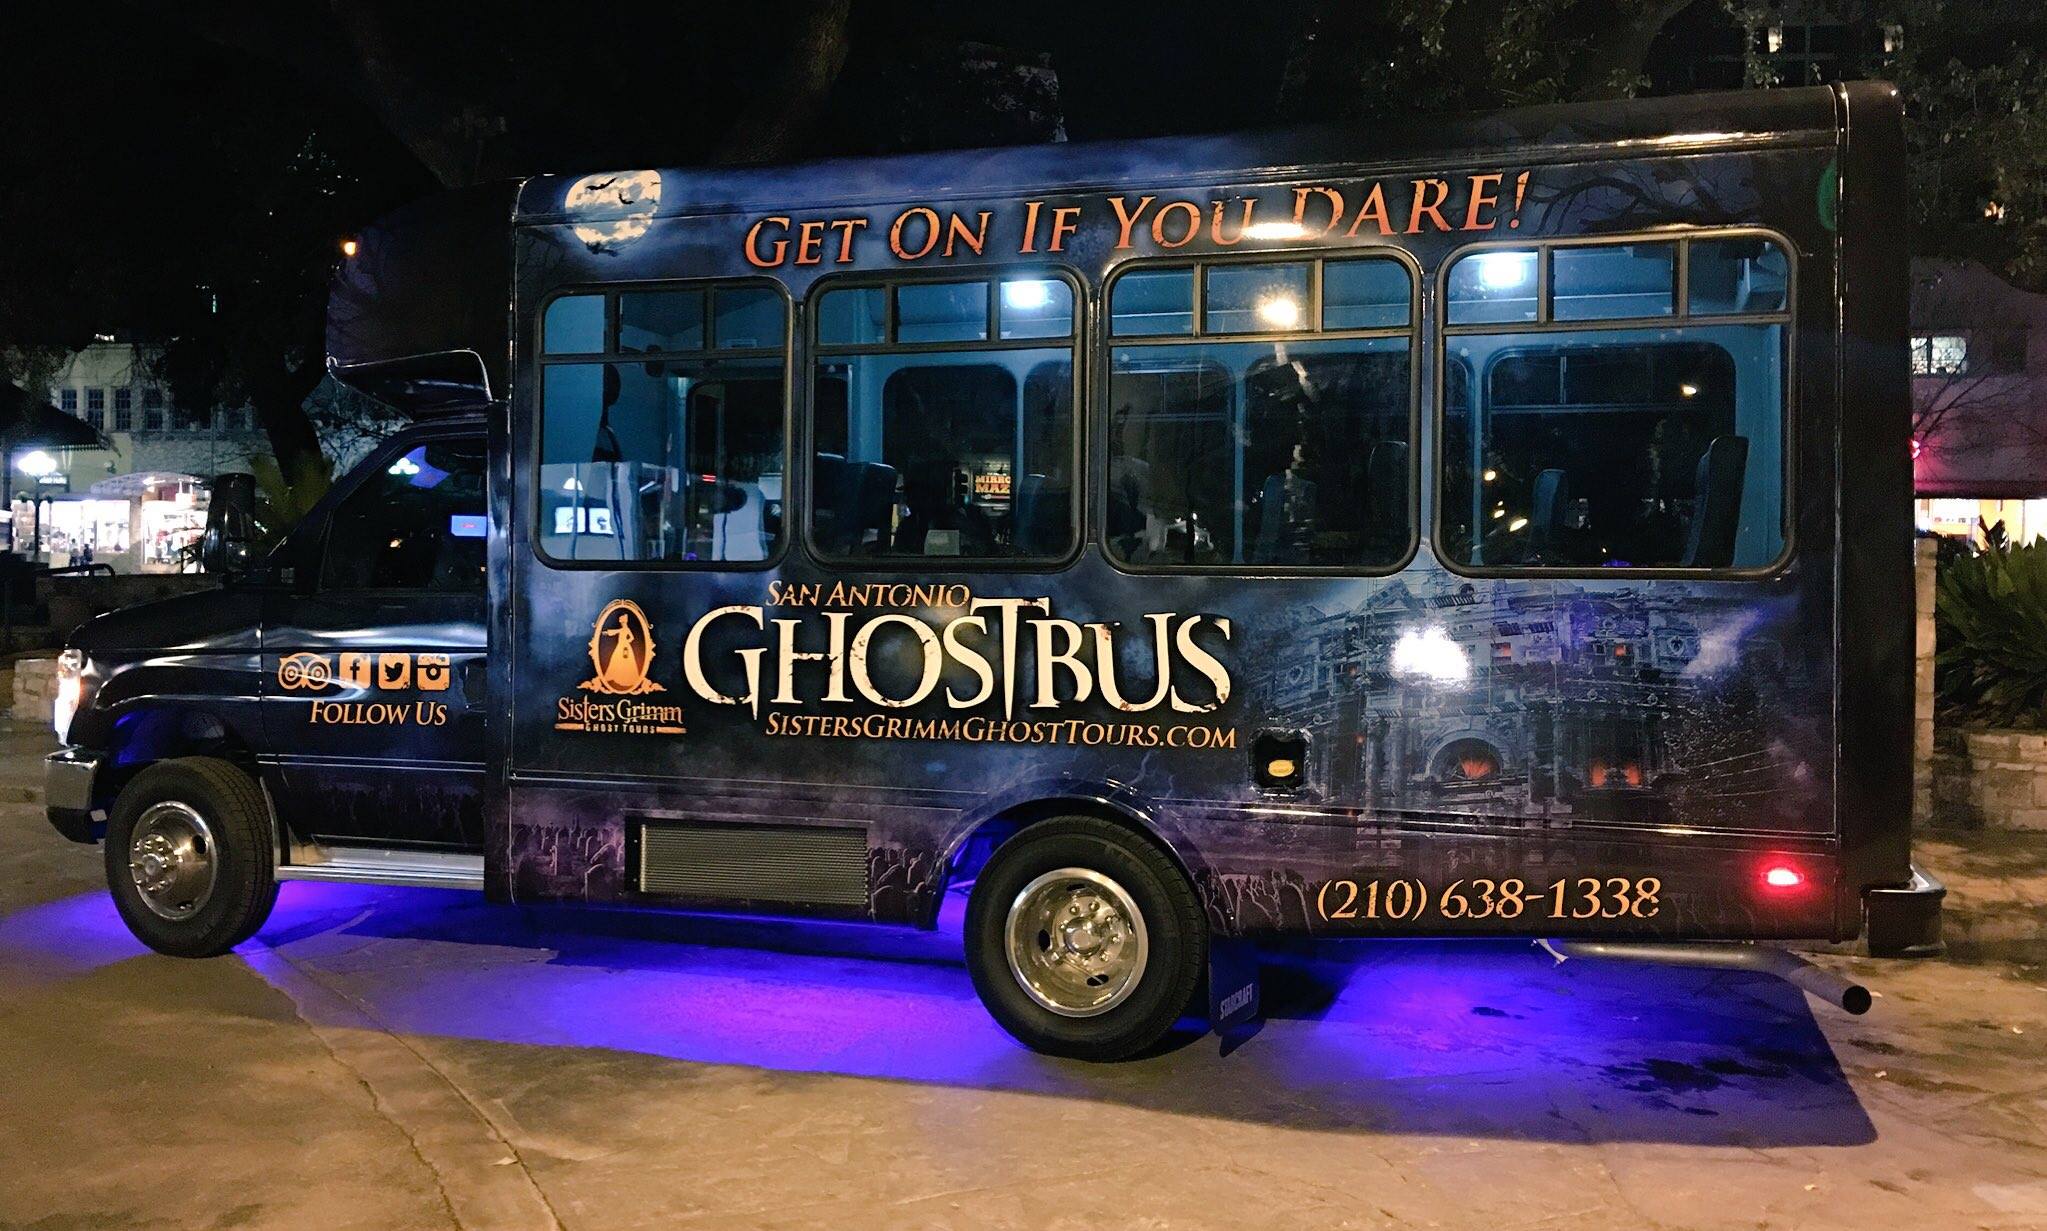 San Antonio Ghost Bus tours brings chills and knowledge to the Alamo City